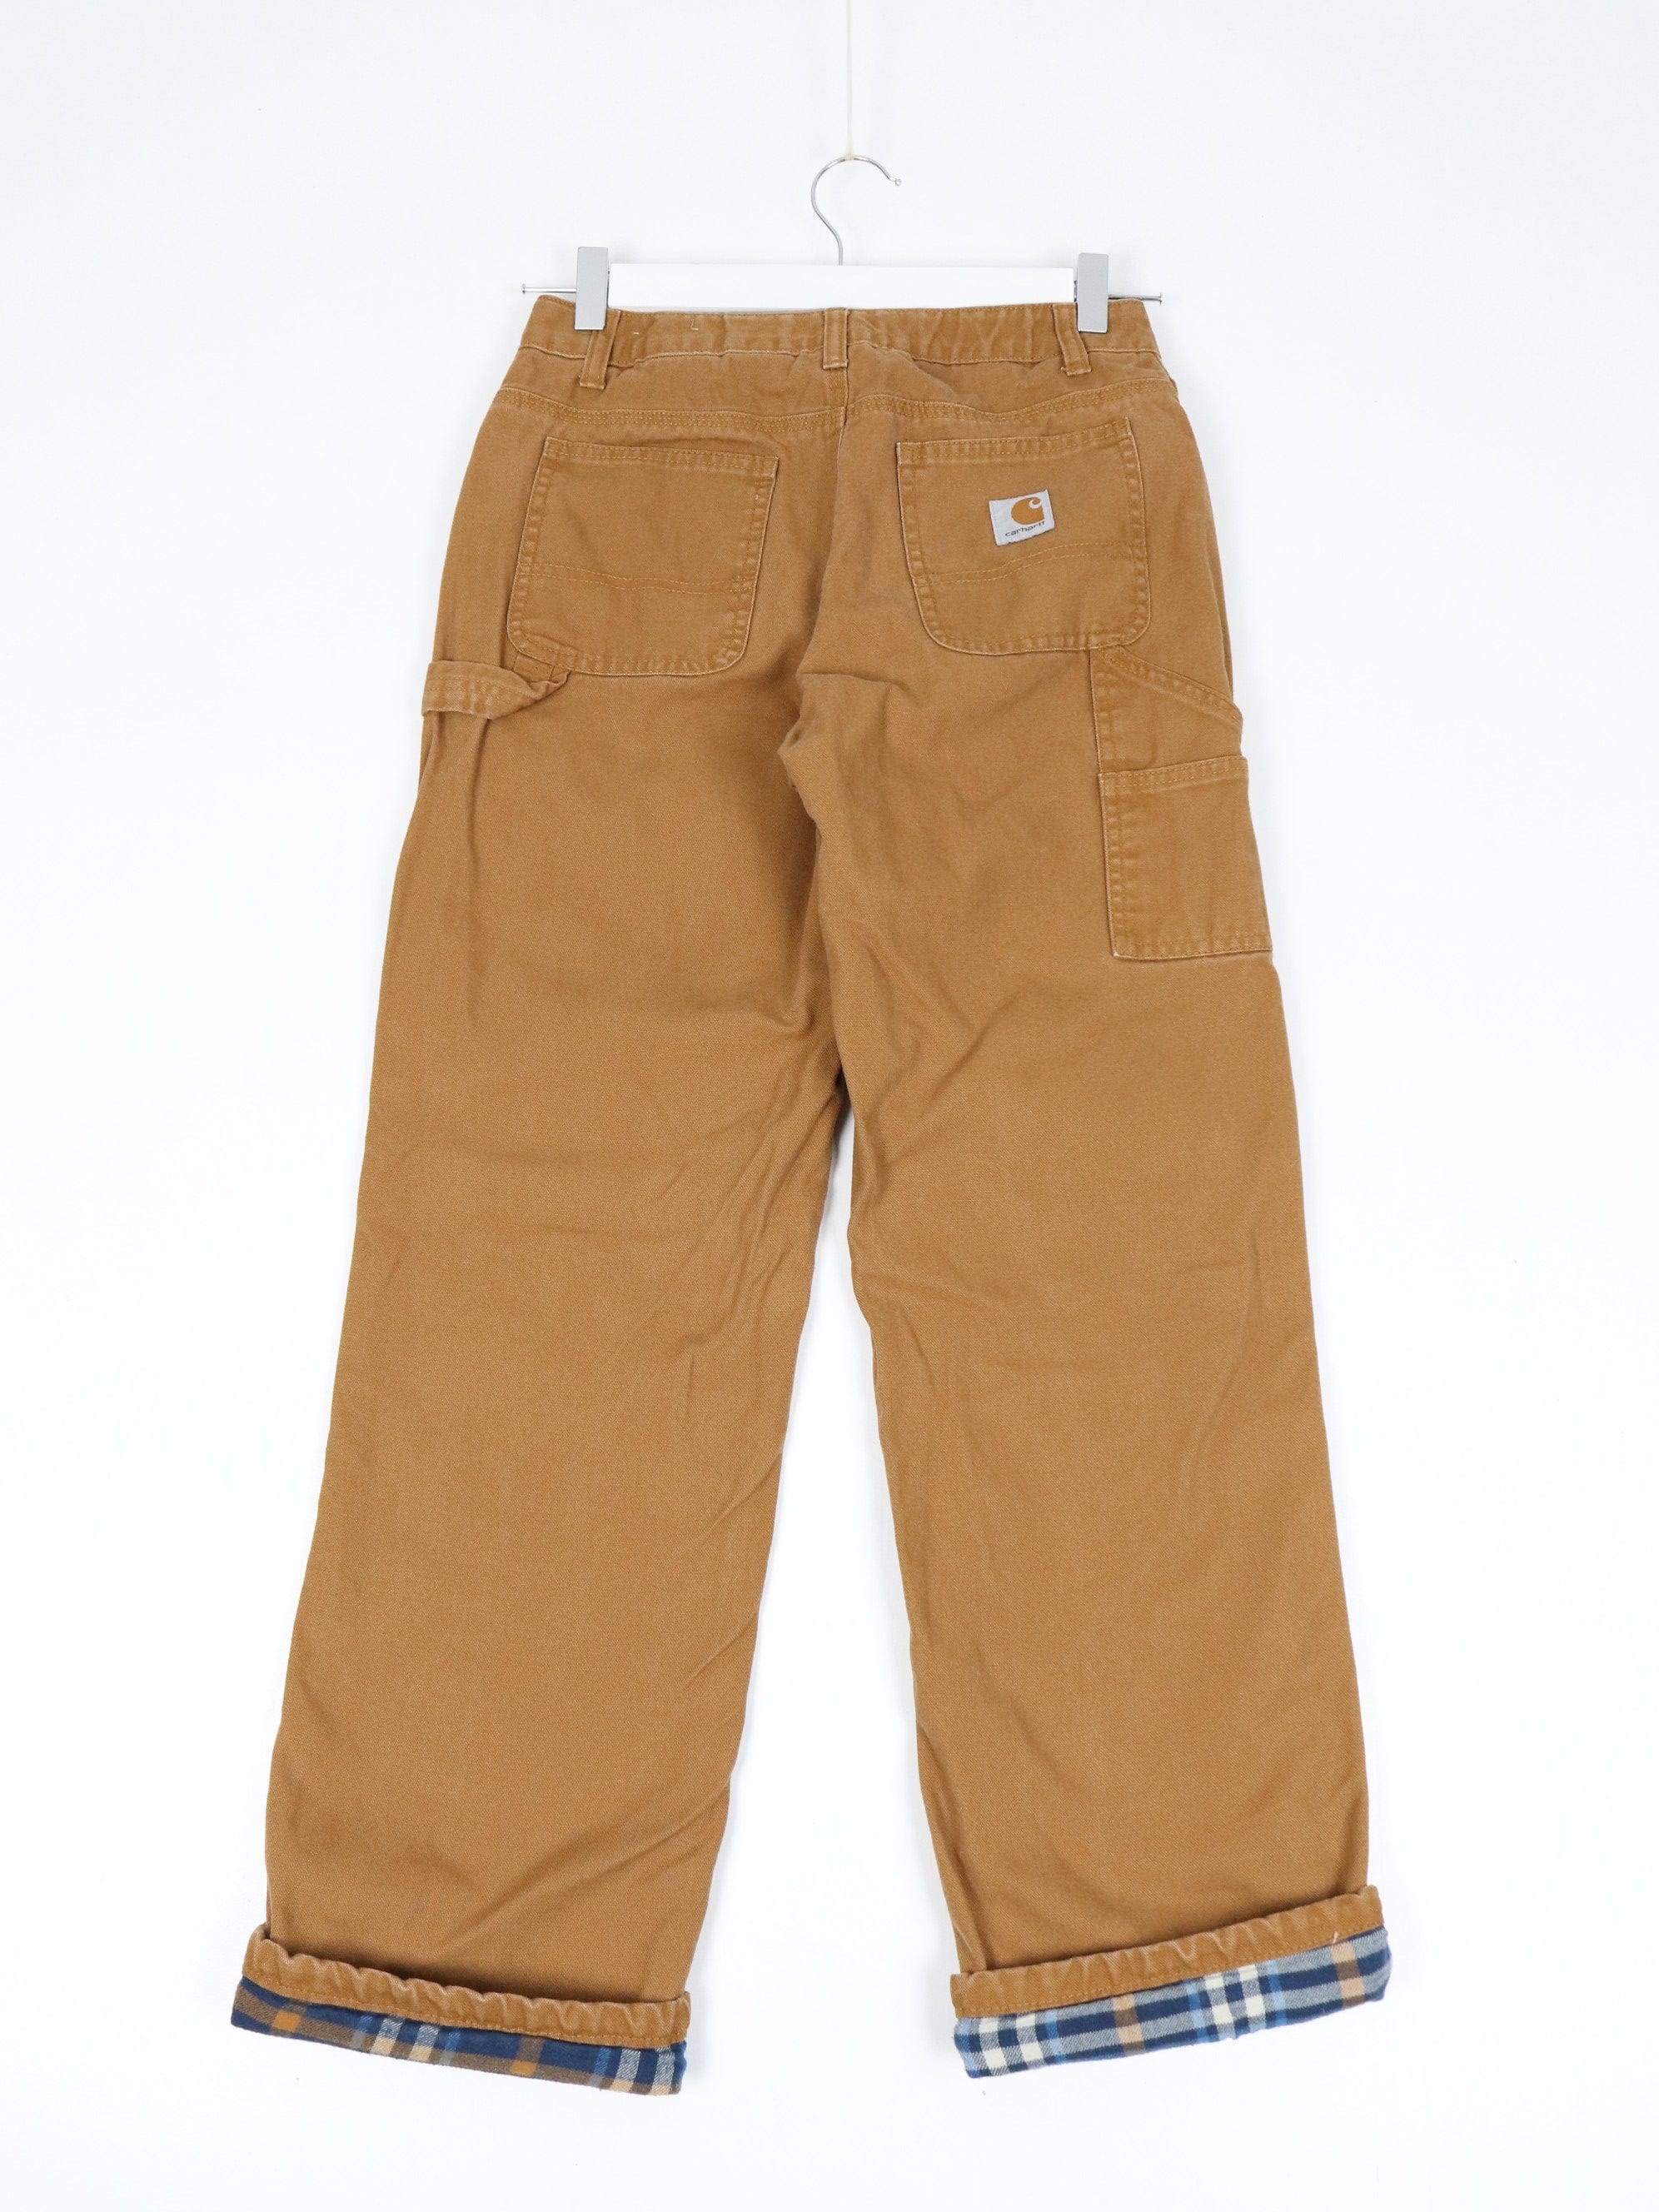 Carhartt Carpenter/Work Pants - clothing & accessories - by owner - apparel  sale - craigslist